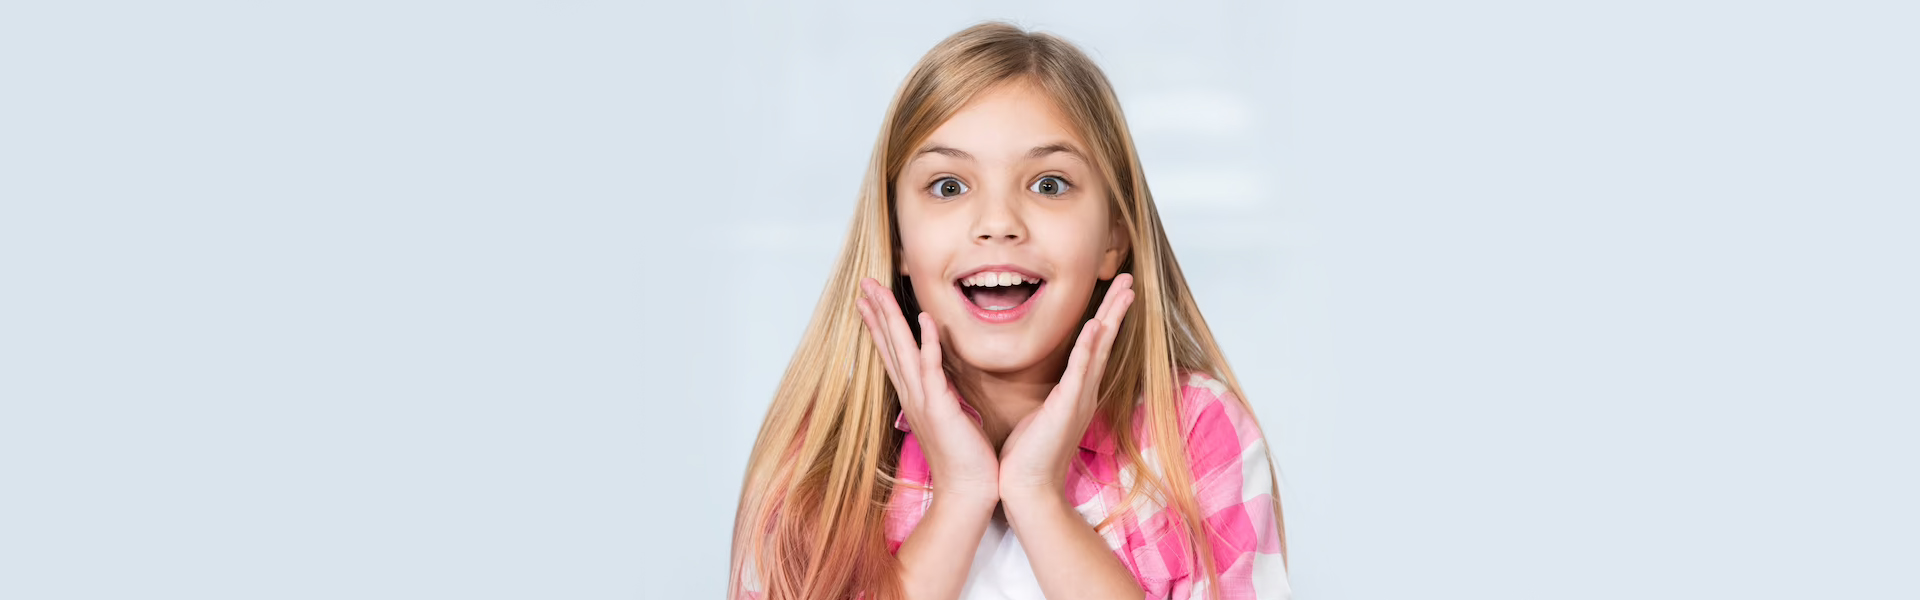 Kids Dental Exams and Systemic Health: Understanding the Connection